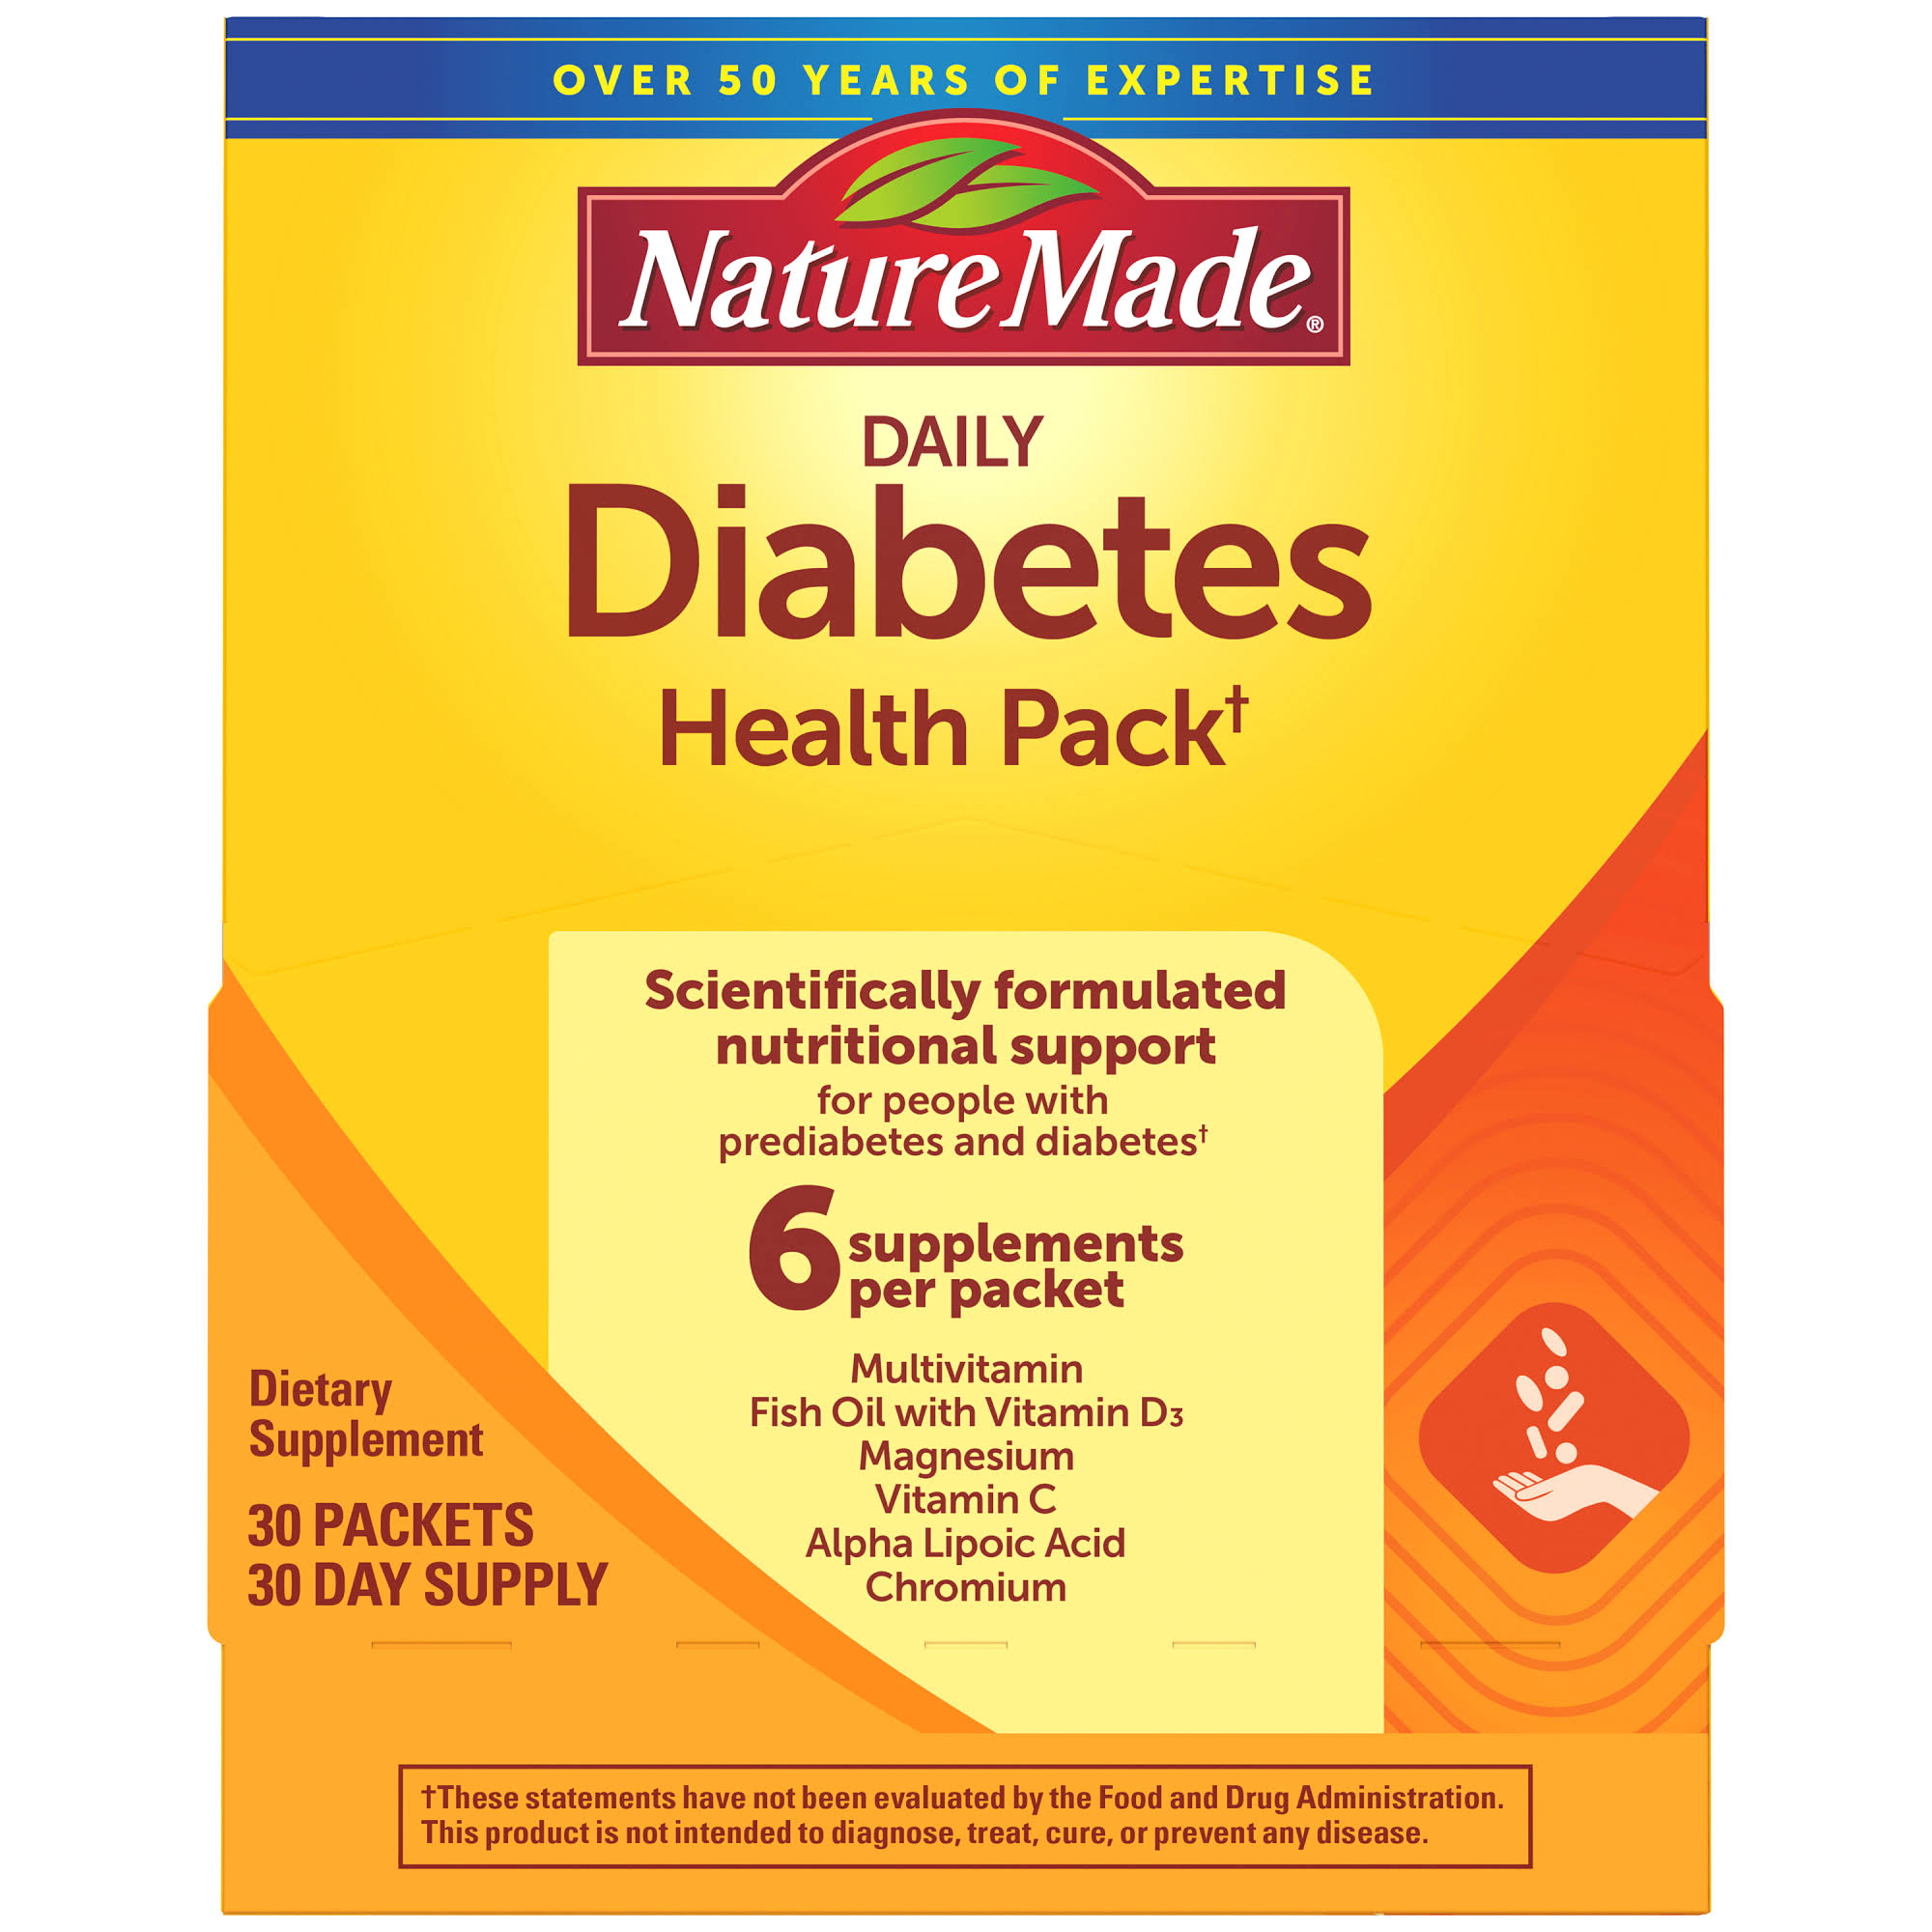 Nature Made Diabetes Health Packs, Daily, Packets - 30 packets